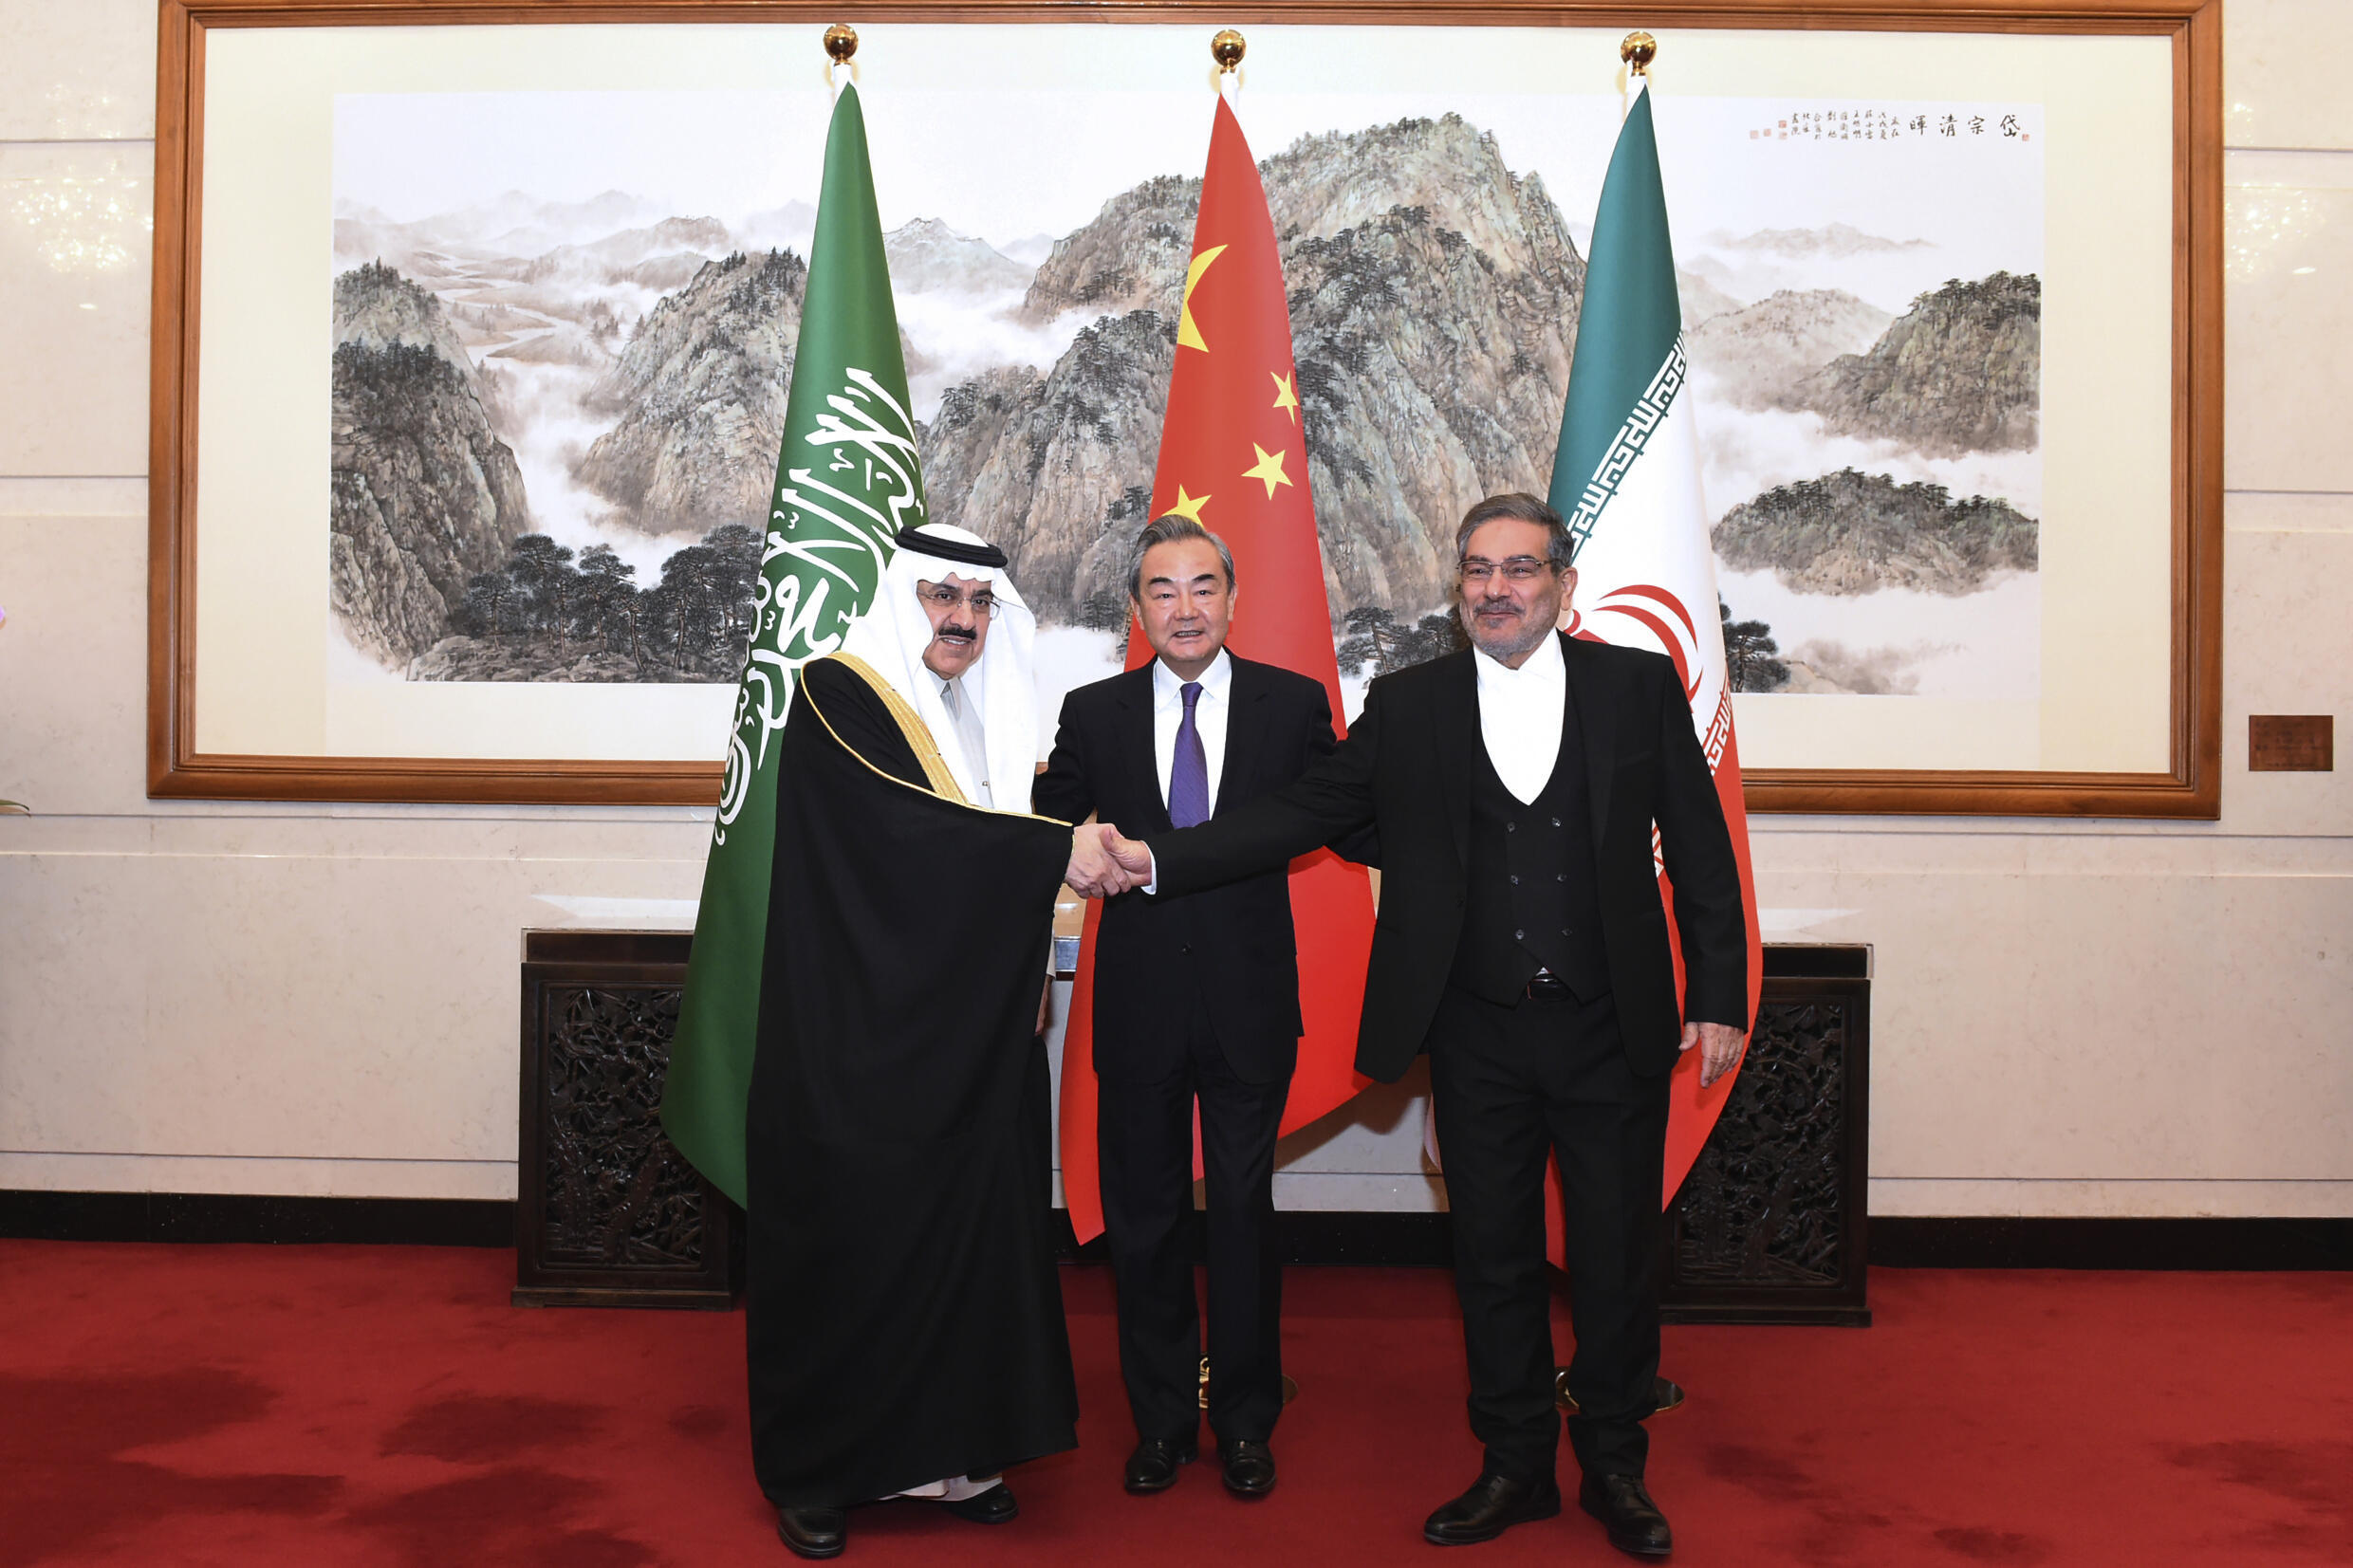 Ali Shamkhani, secretary of Iran's Supreme National Security Council (right) shakes hands with Saudi national security adviser Musaad bin Mohammed al-Aiban (left) joined by China's Wang Yi (center).